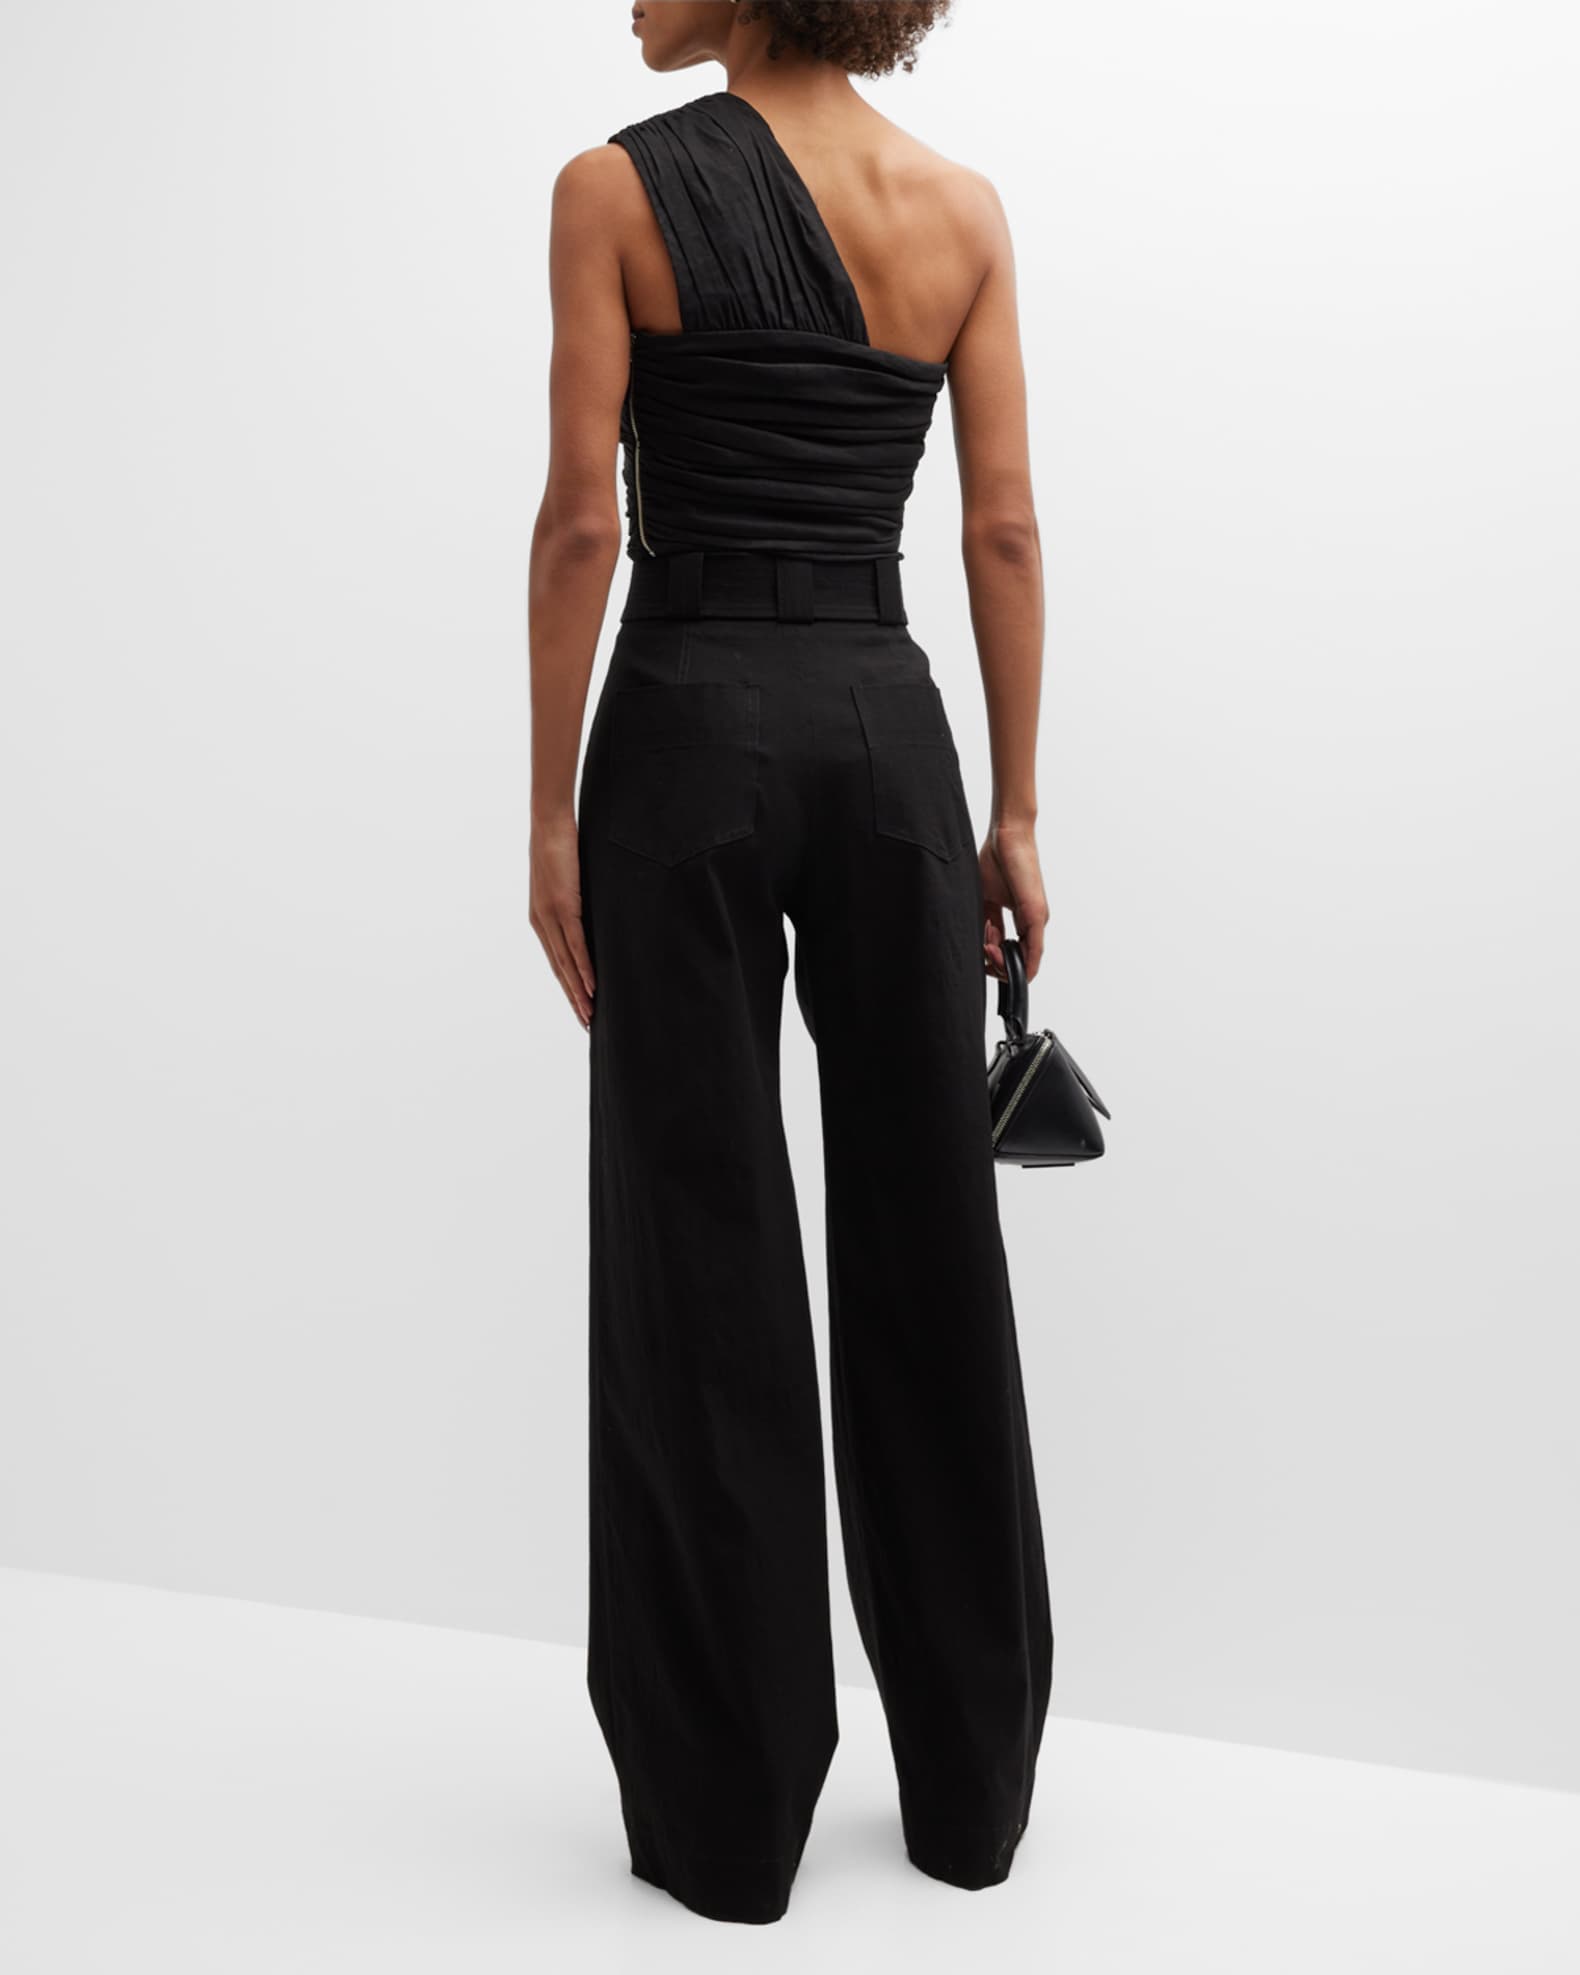 A.L.C. Apollo Gathered One-Shoulder Crop Top | Neiman Marcus